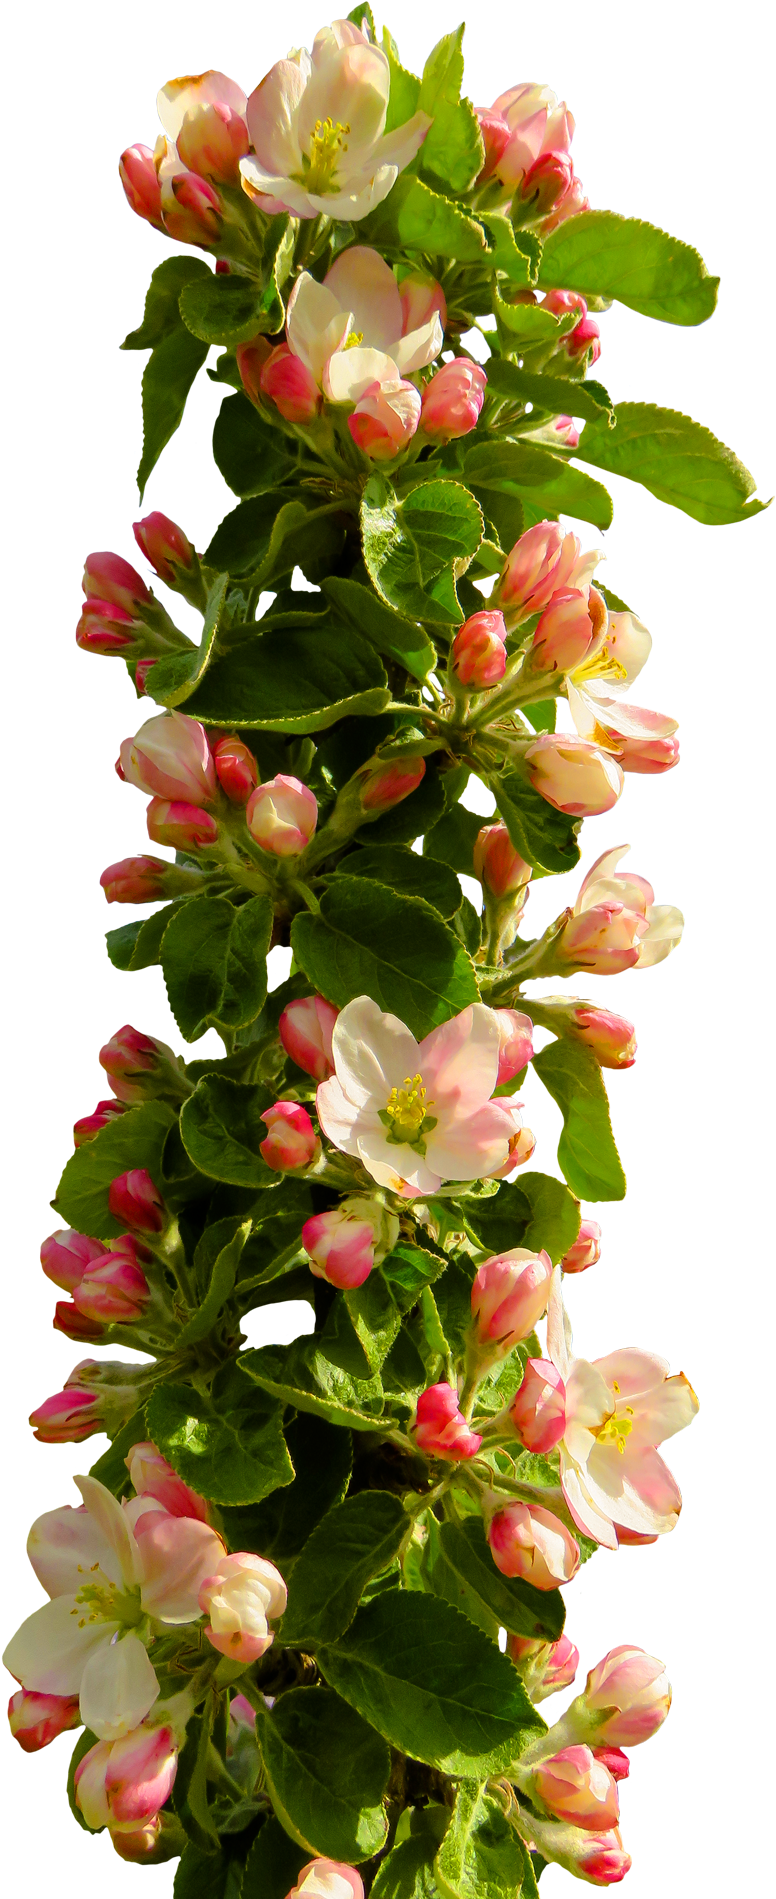 Best Spring Flower Png Transparent Image With Png Flower - Best Spring Flower Png Transparent Image With Png Flower (1000x1921)